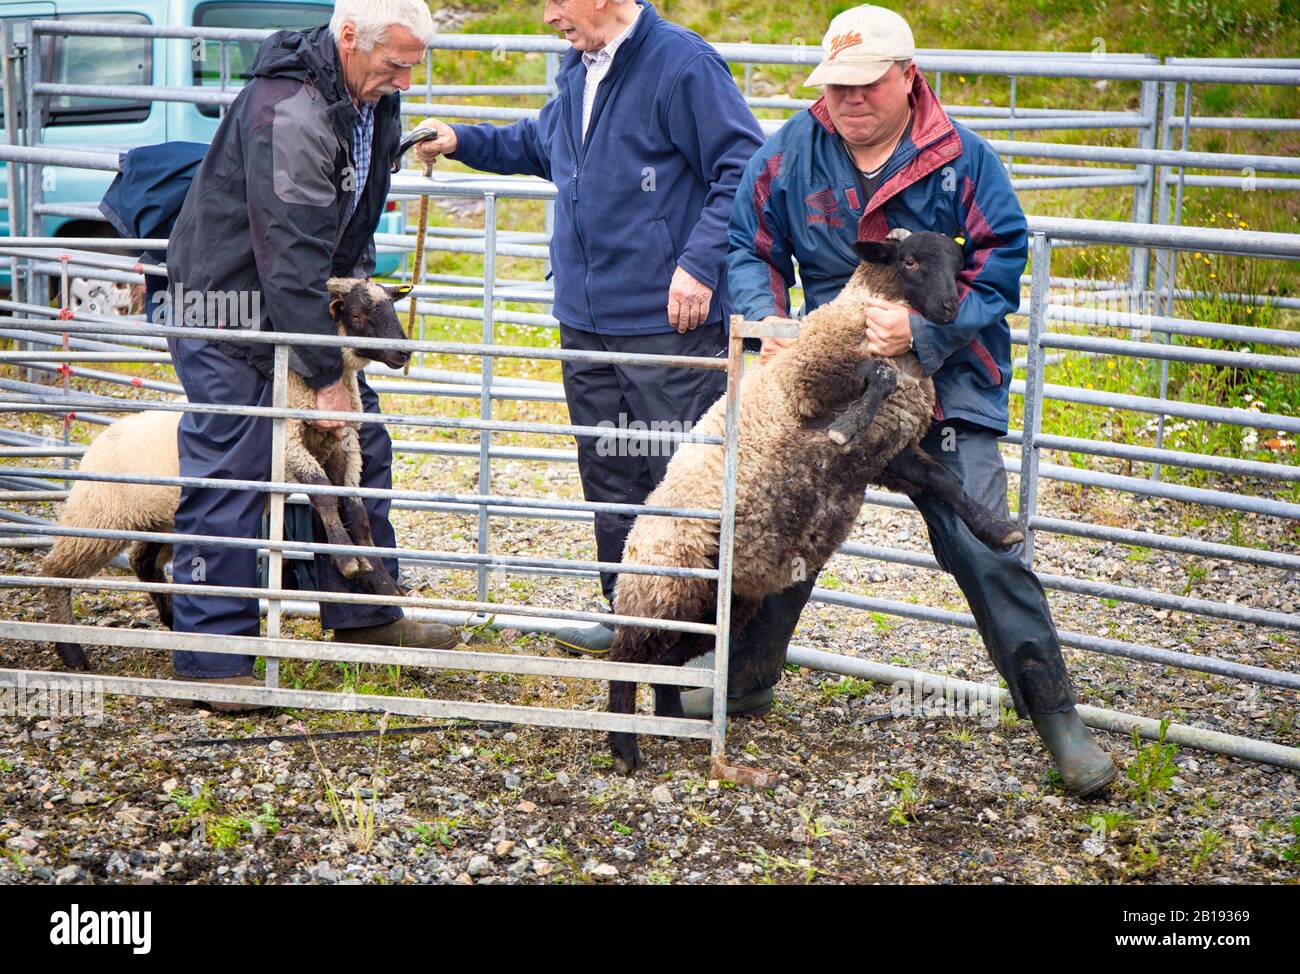 Sheep handlers farmers holding sheep during judging at North Harris Agricultural Show 2019, Tarbert, Isle of Harris, Outer Hebrides, Scotland Stock Photo